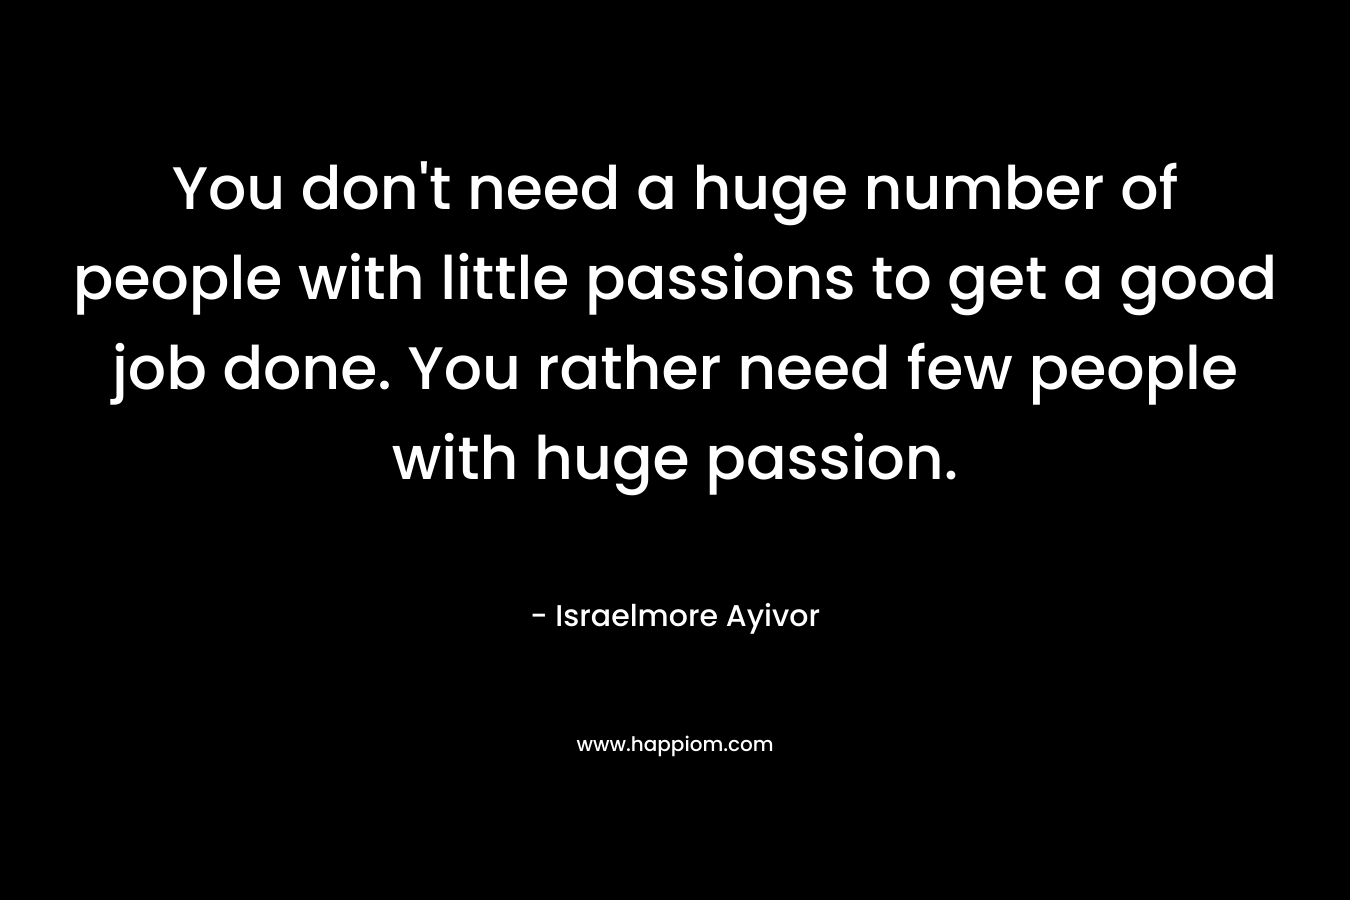 You don't need a huge number of people with little passions to get a good job done. You rather need few people with huge passion.